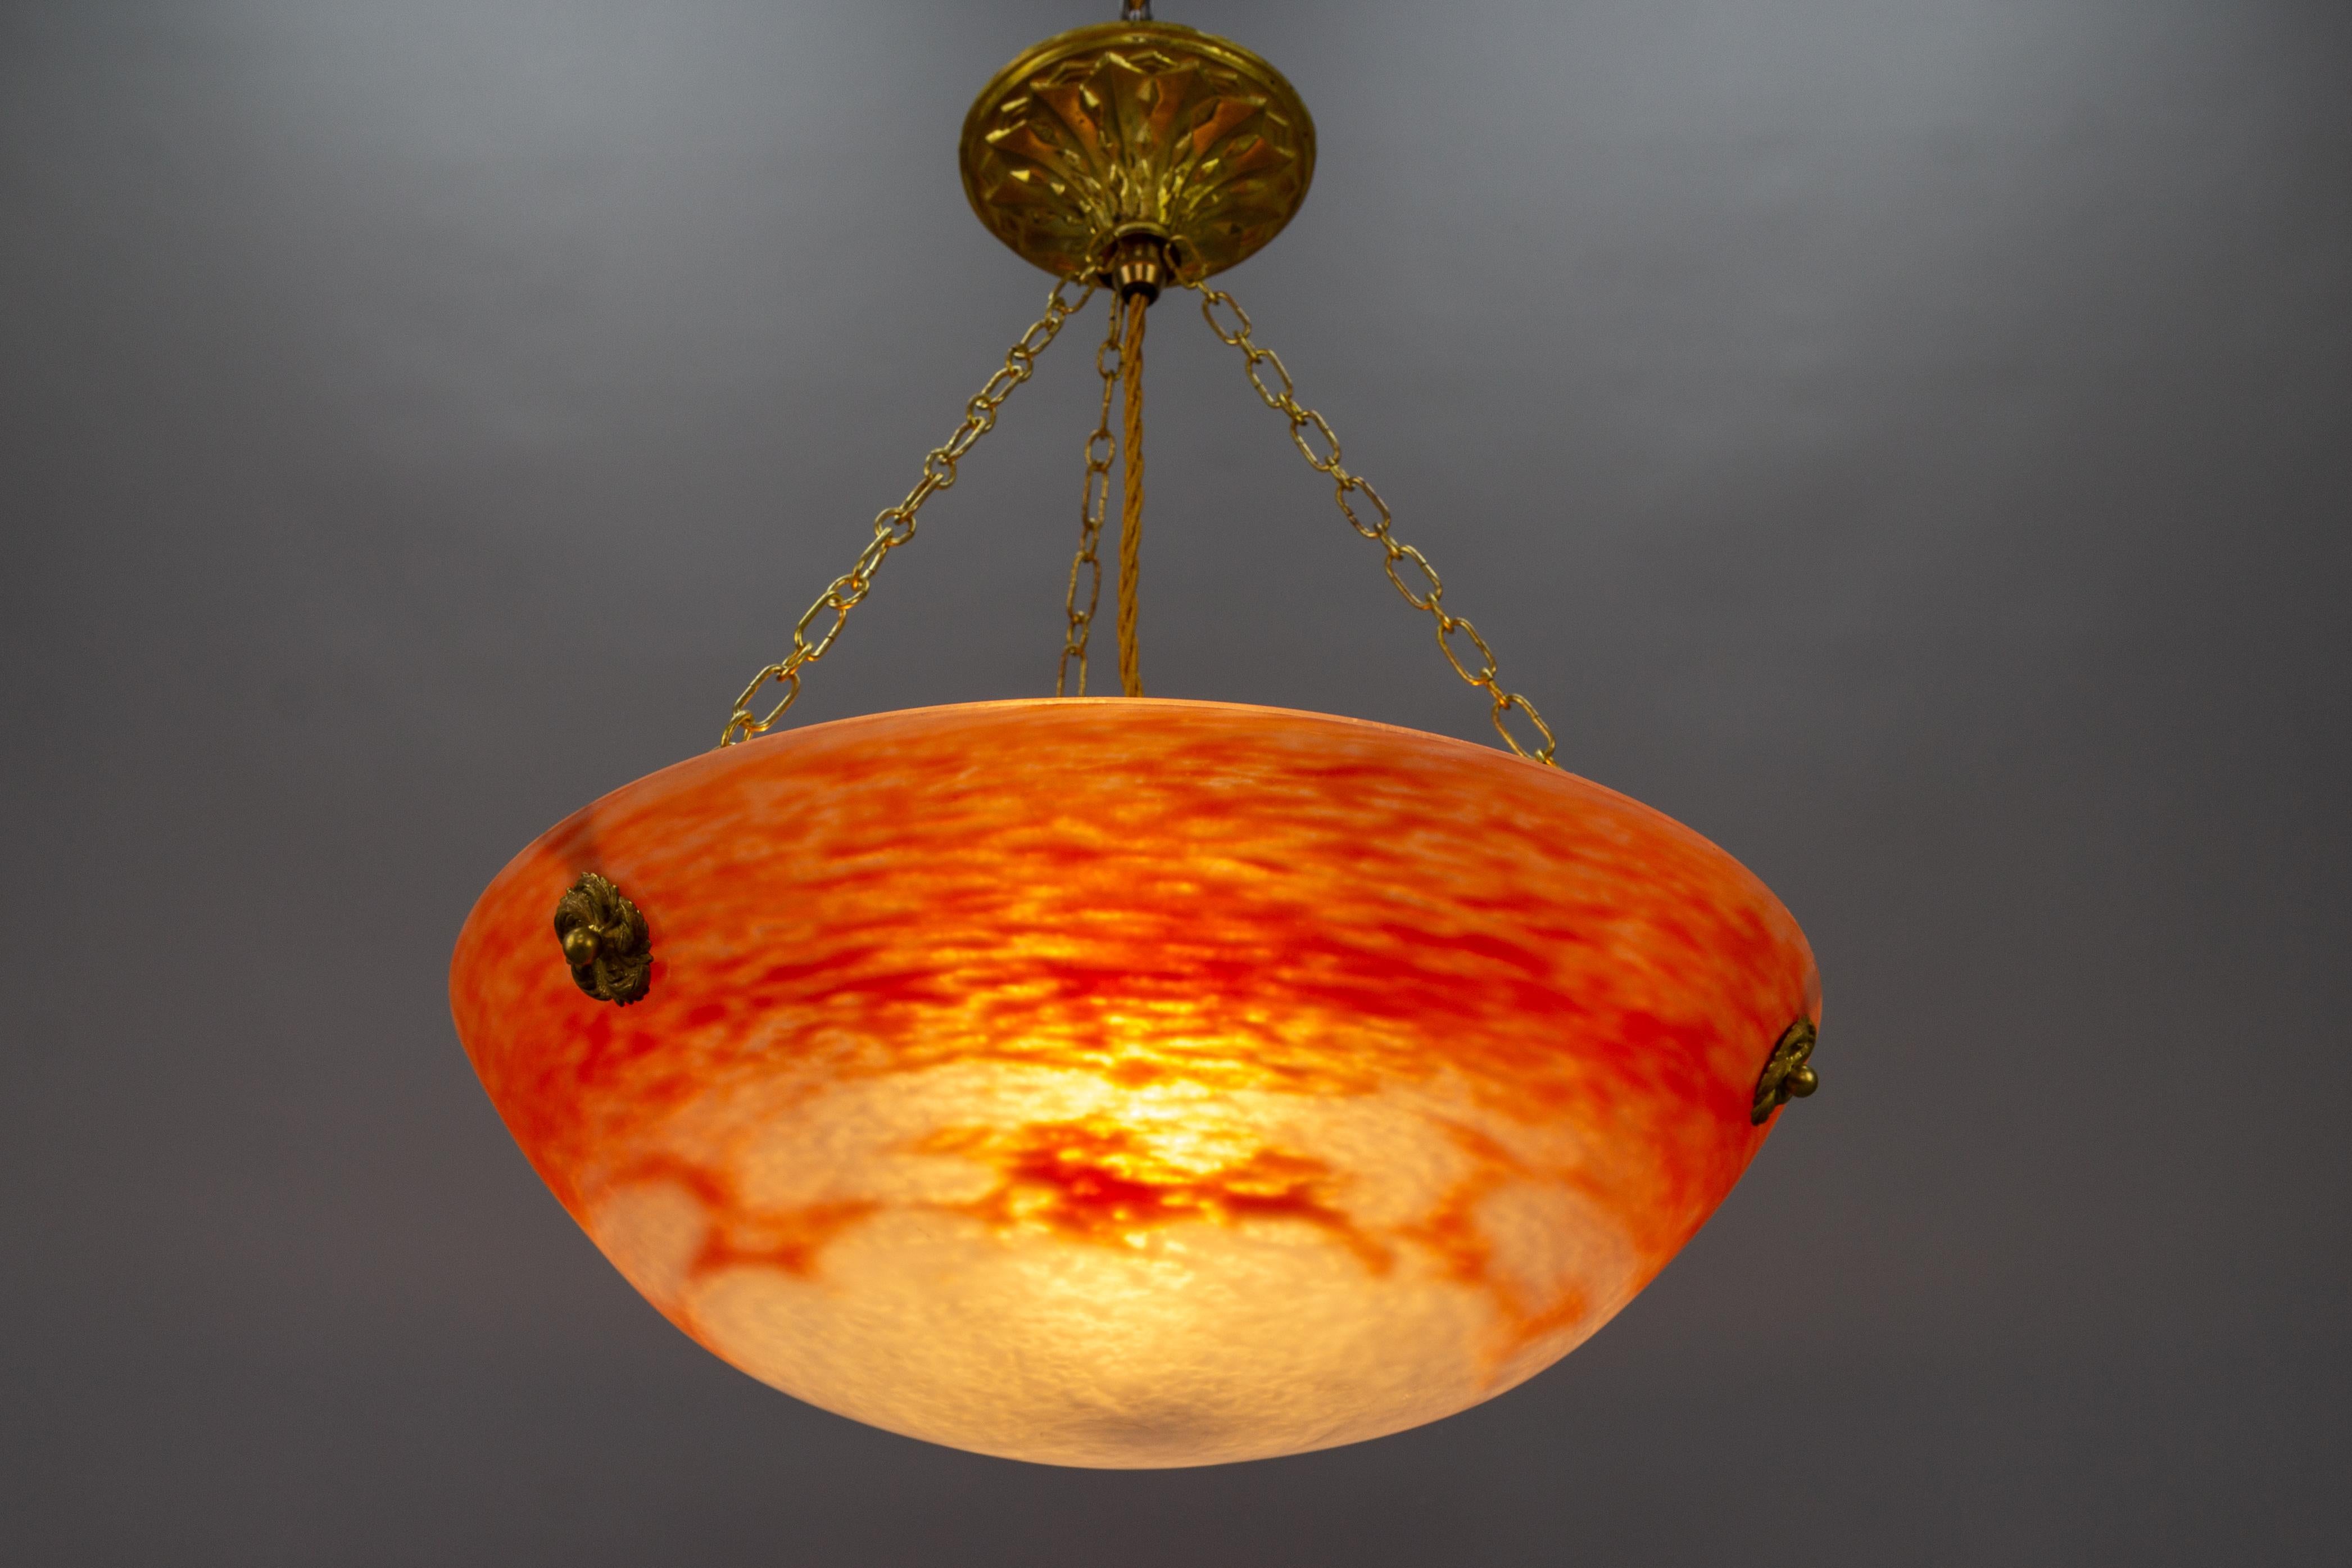 French Art Nouveau Orange and White Glass Pendant Light Signed Noverdy, 1920s For Sale 7